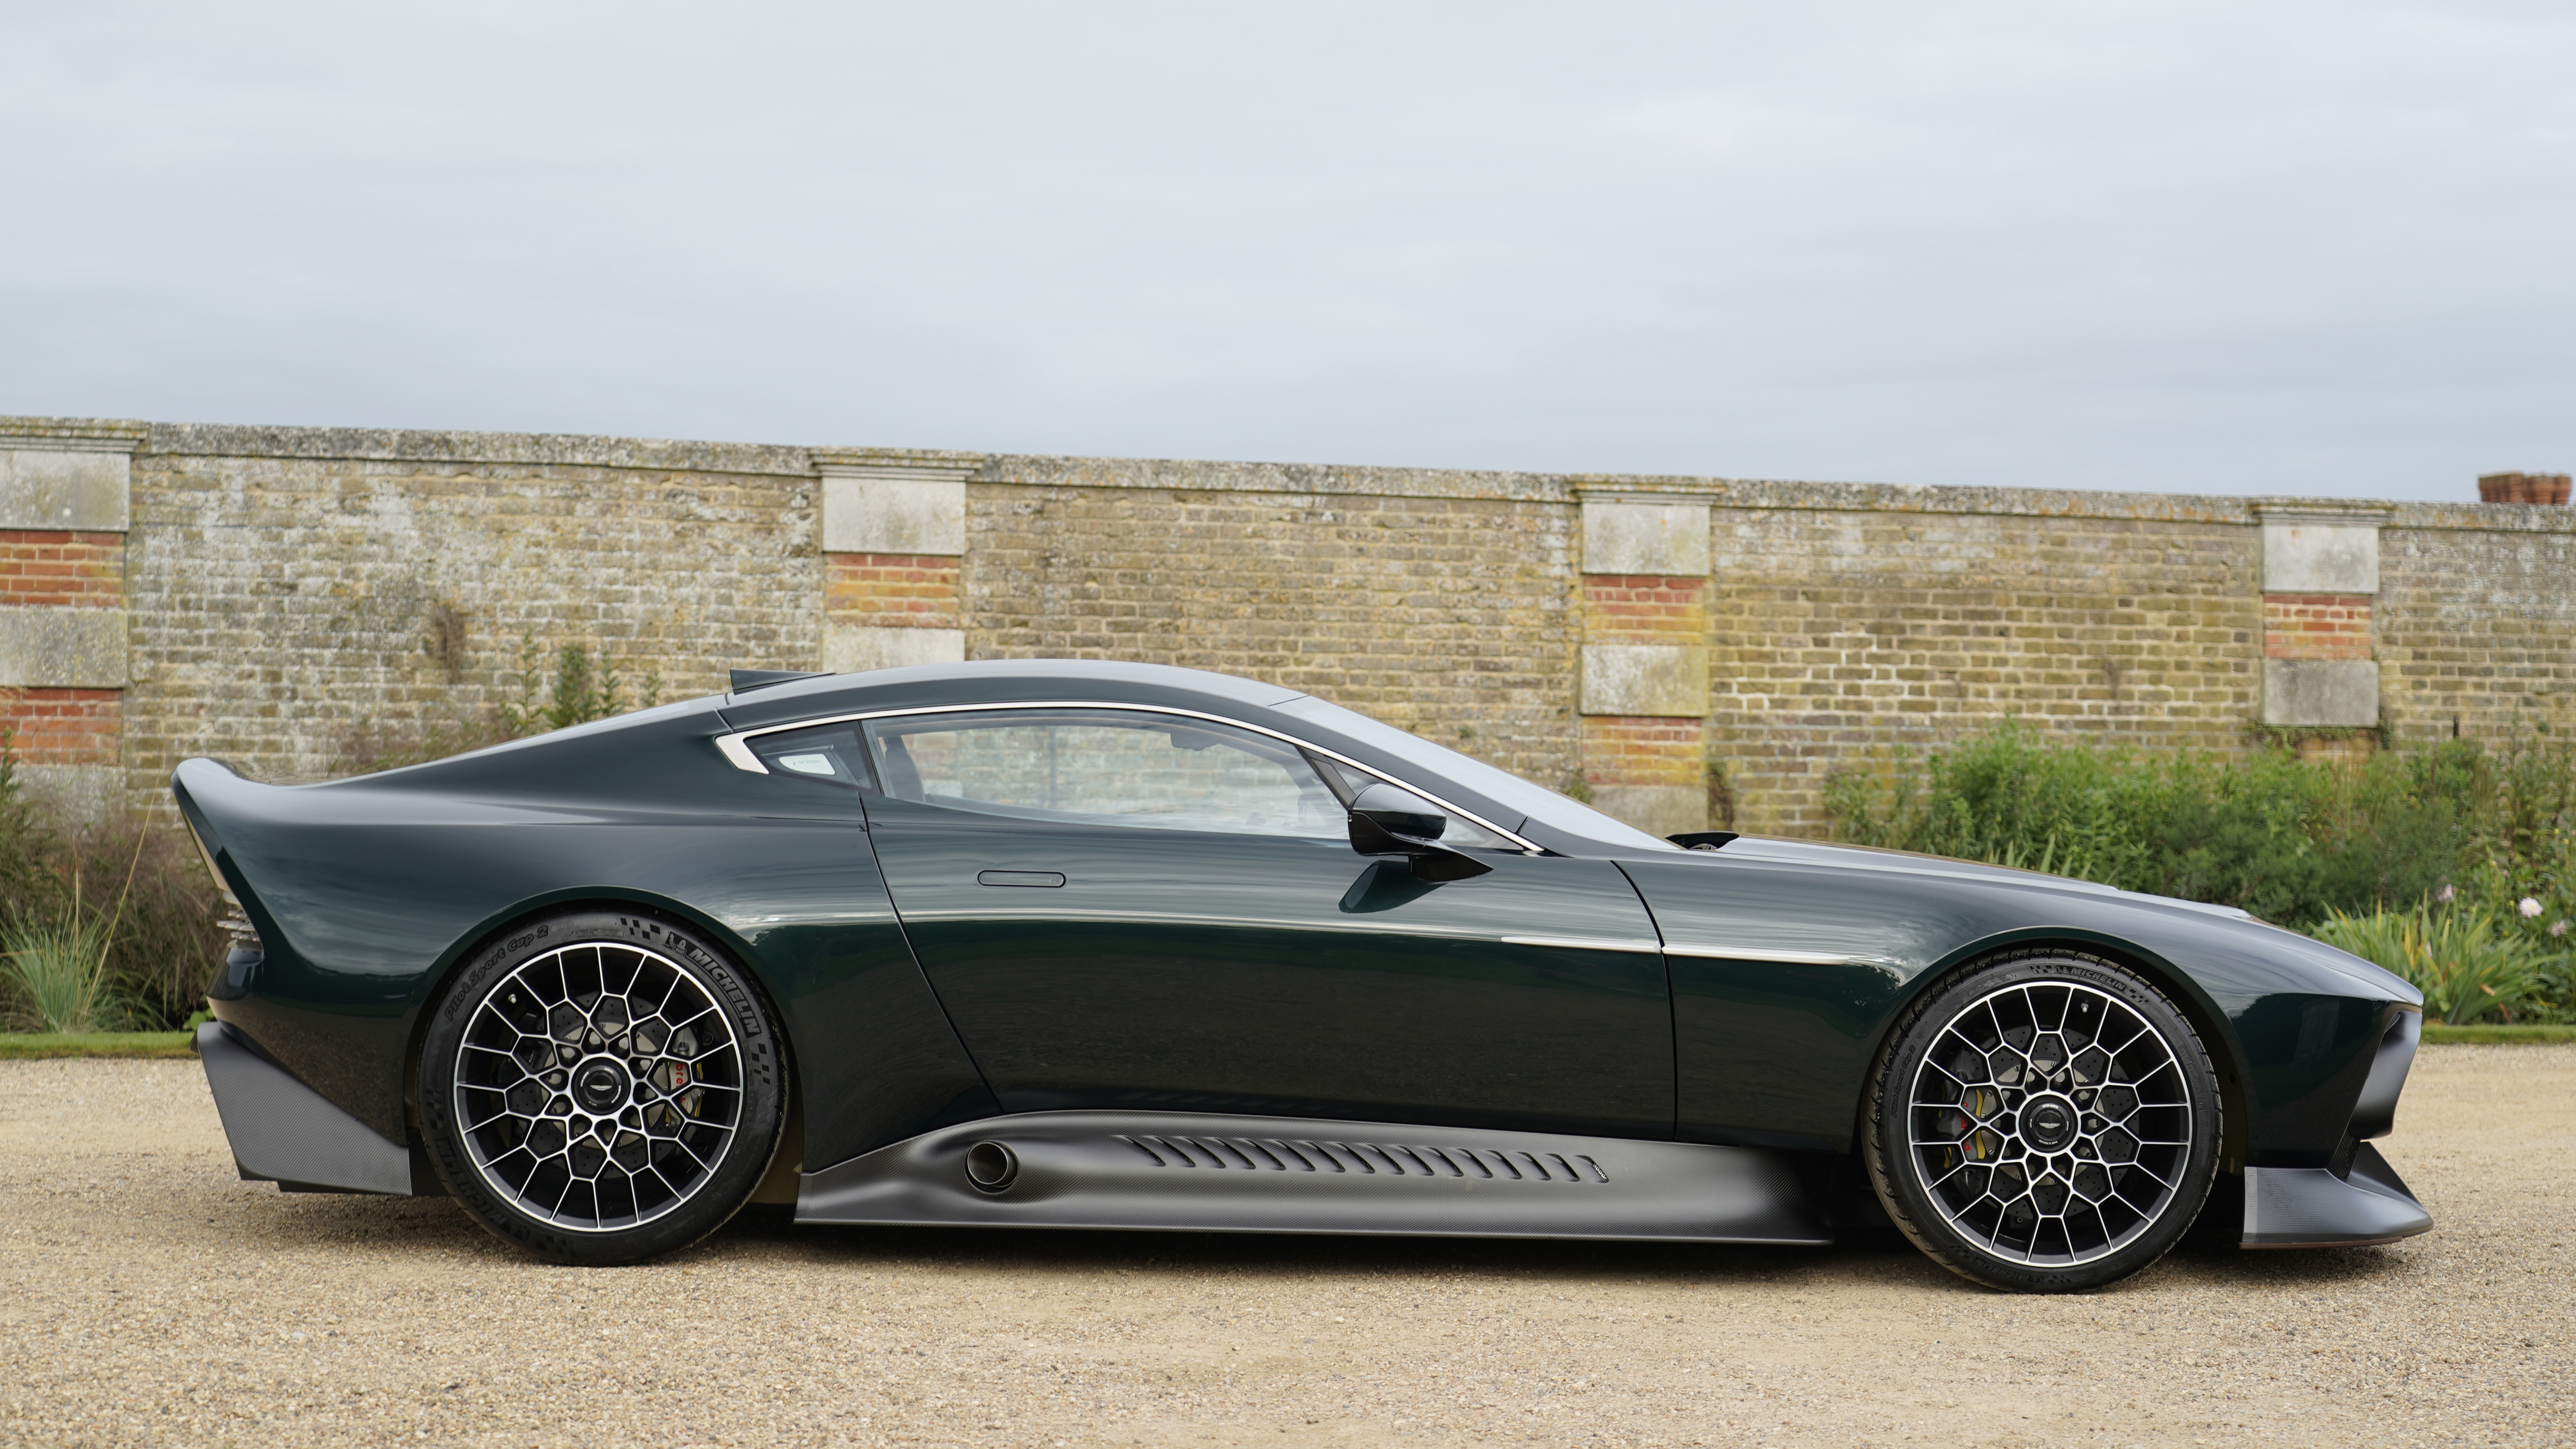 General 6000x3375 vehicle car Aston Martin Aston Martin Victor supercars coupe green cars retro style side view wall British cars